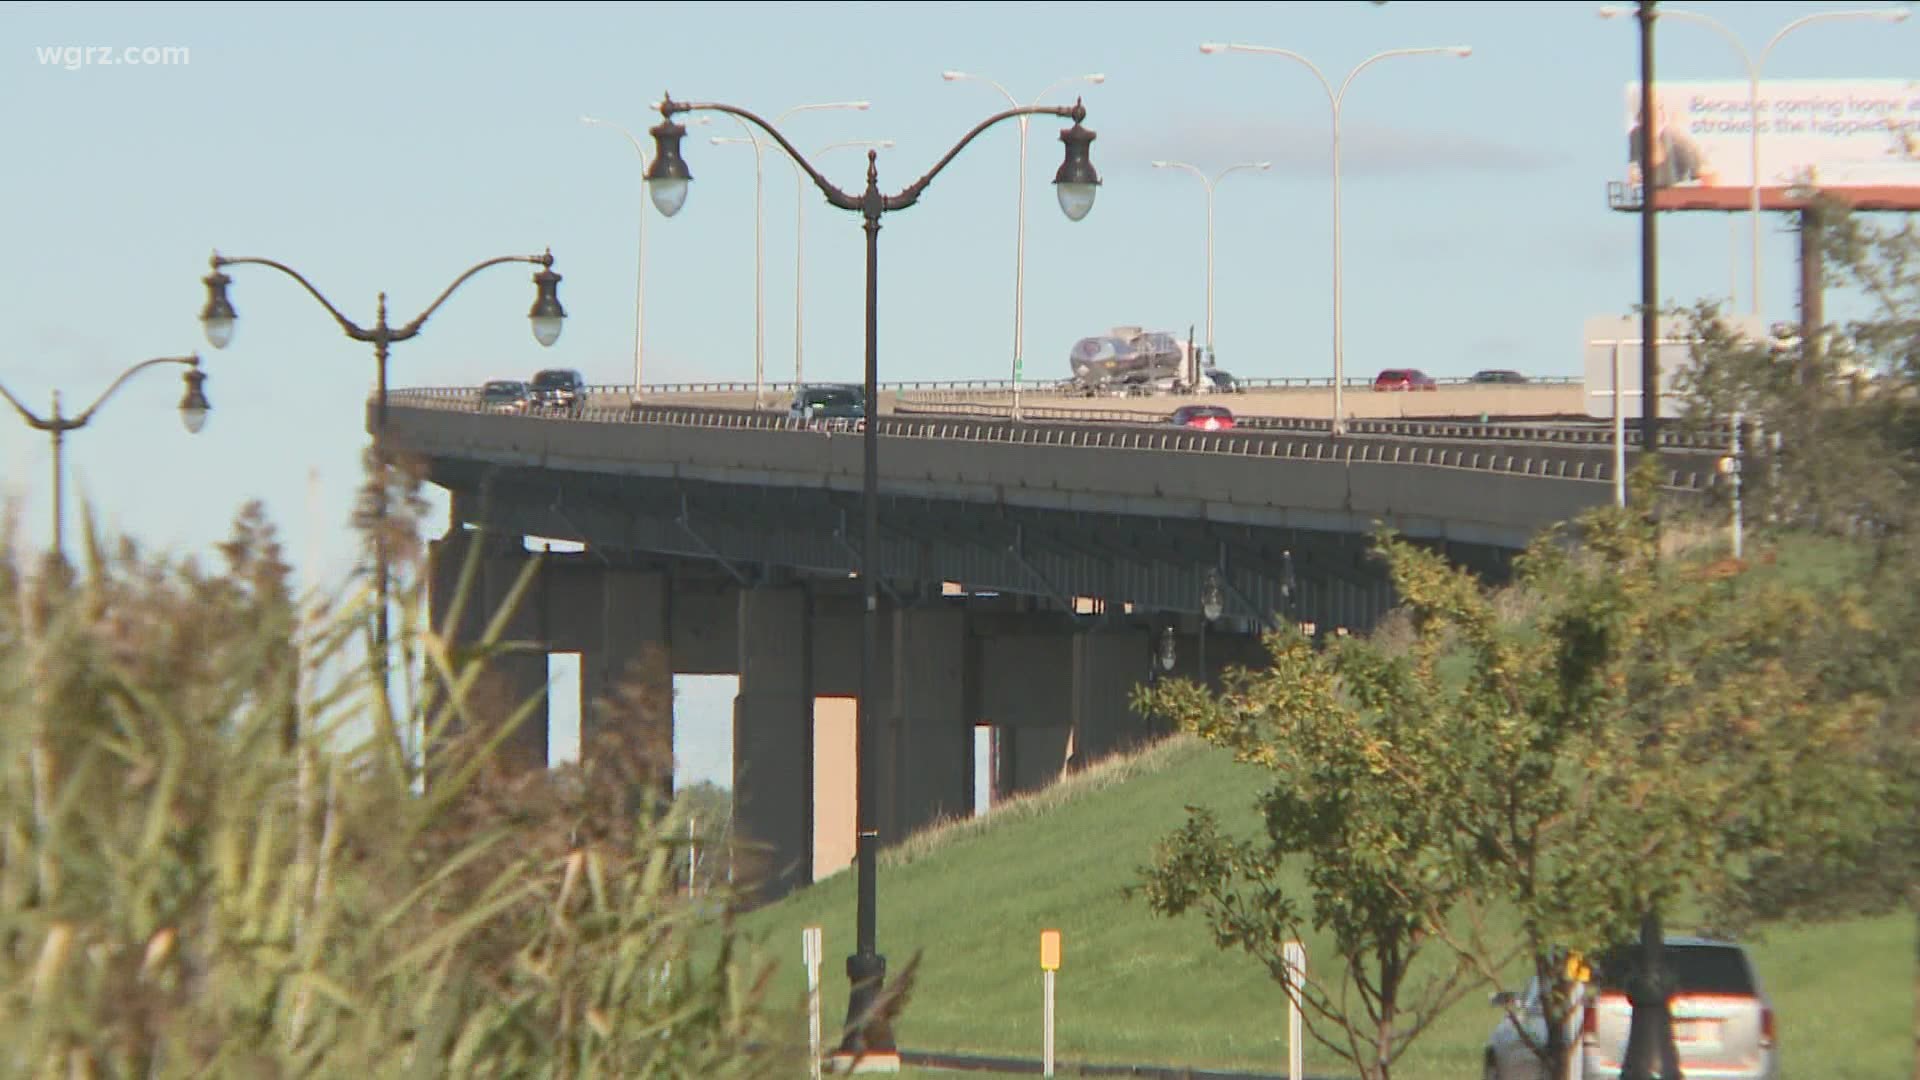 It's been talked about for years, but a proposal to remove the Buffalo Skyway continues to be a hot topic on our 2 On Your Side Facebook page.